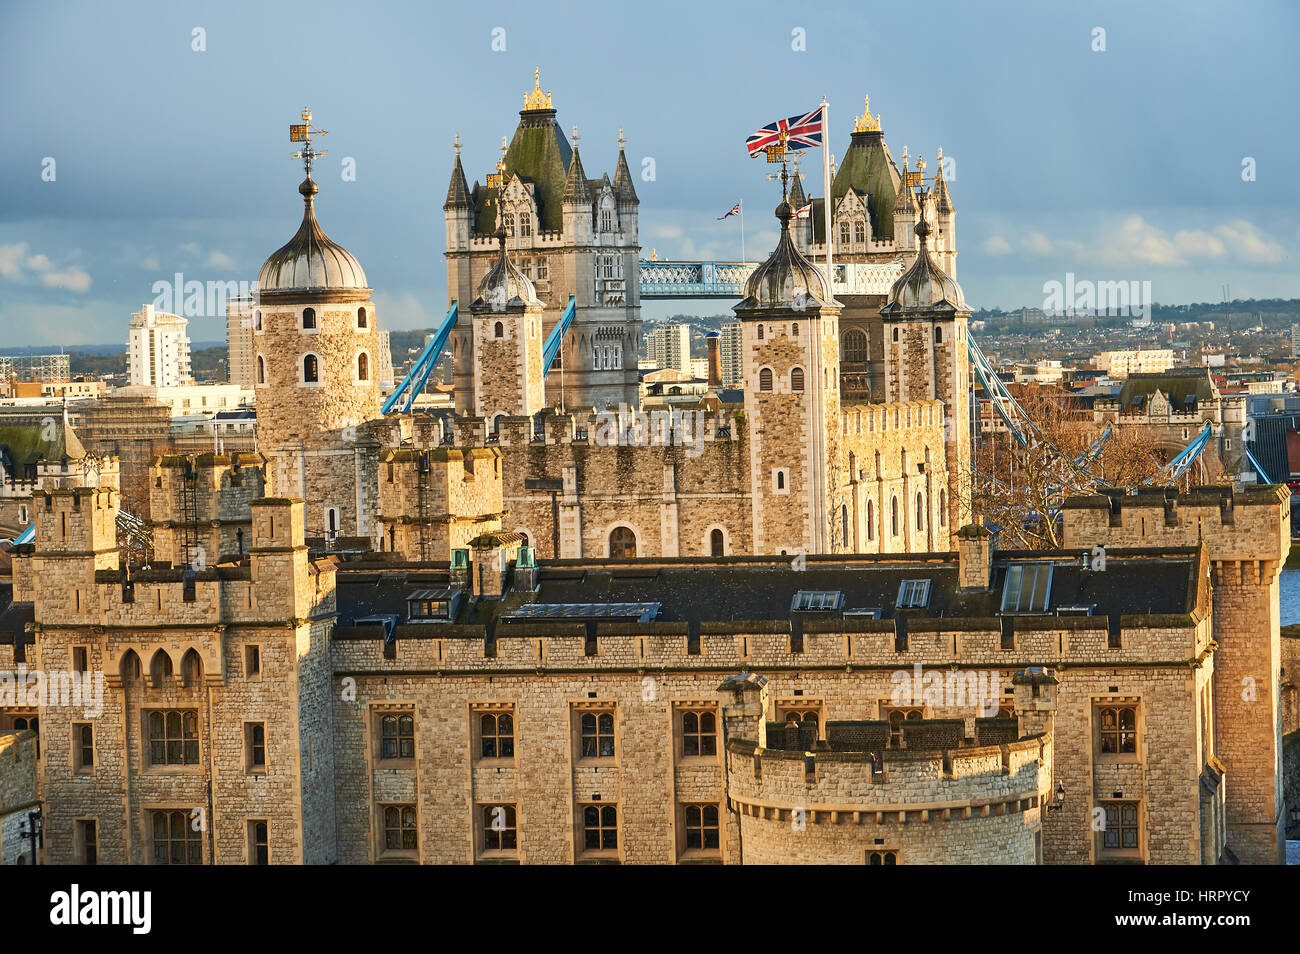 The Tower of London in the city of London has stood since William the Conqueror first built the White Tower, today it is a popular tourist attraction Stock Photo